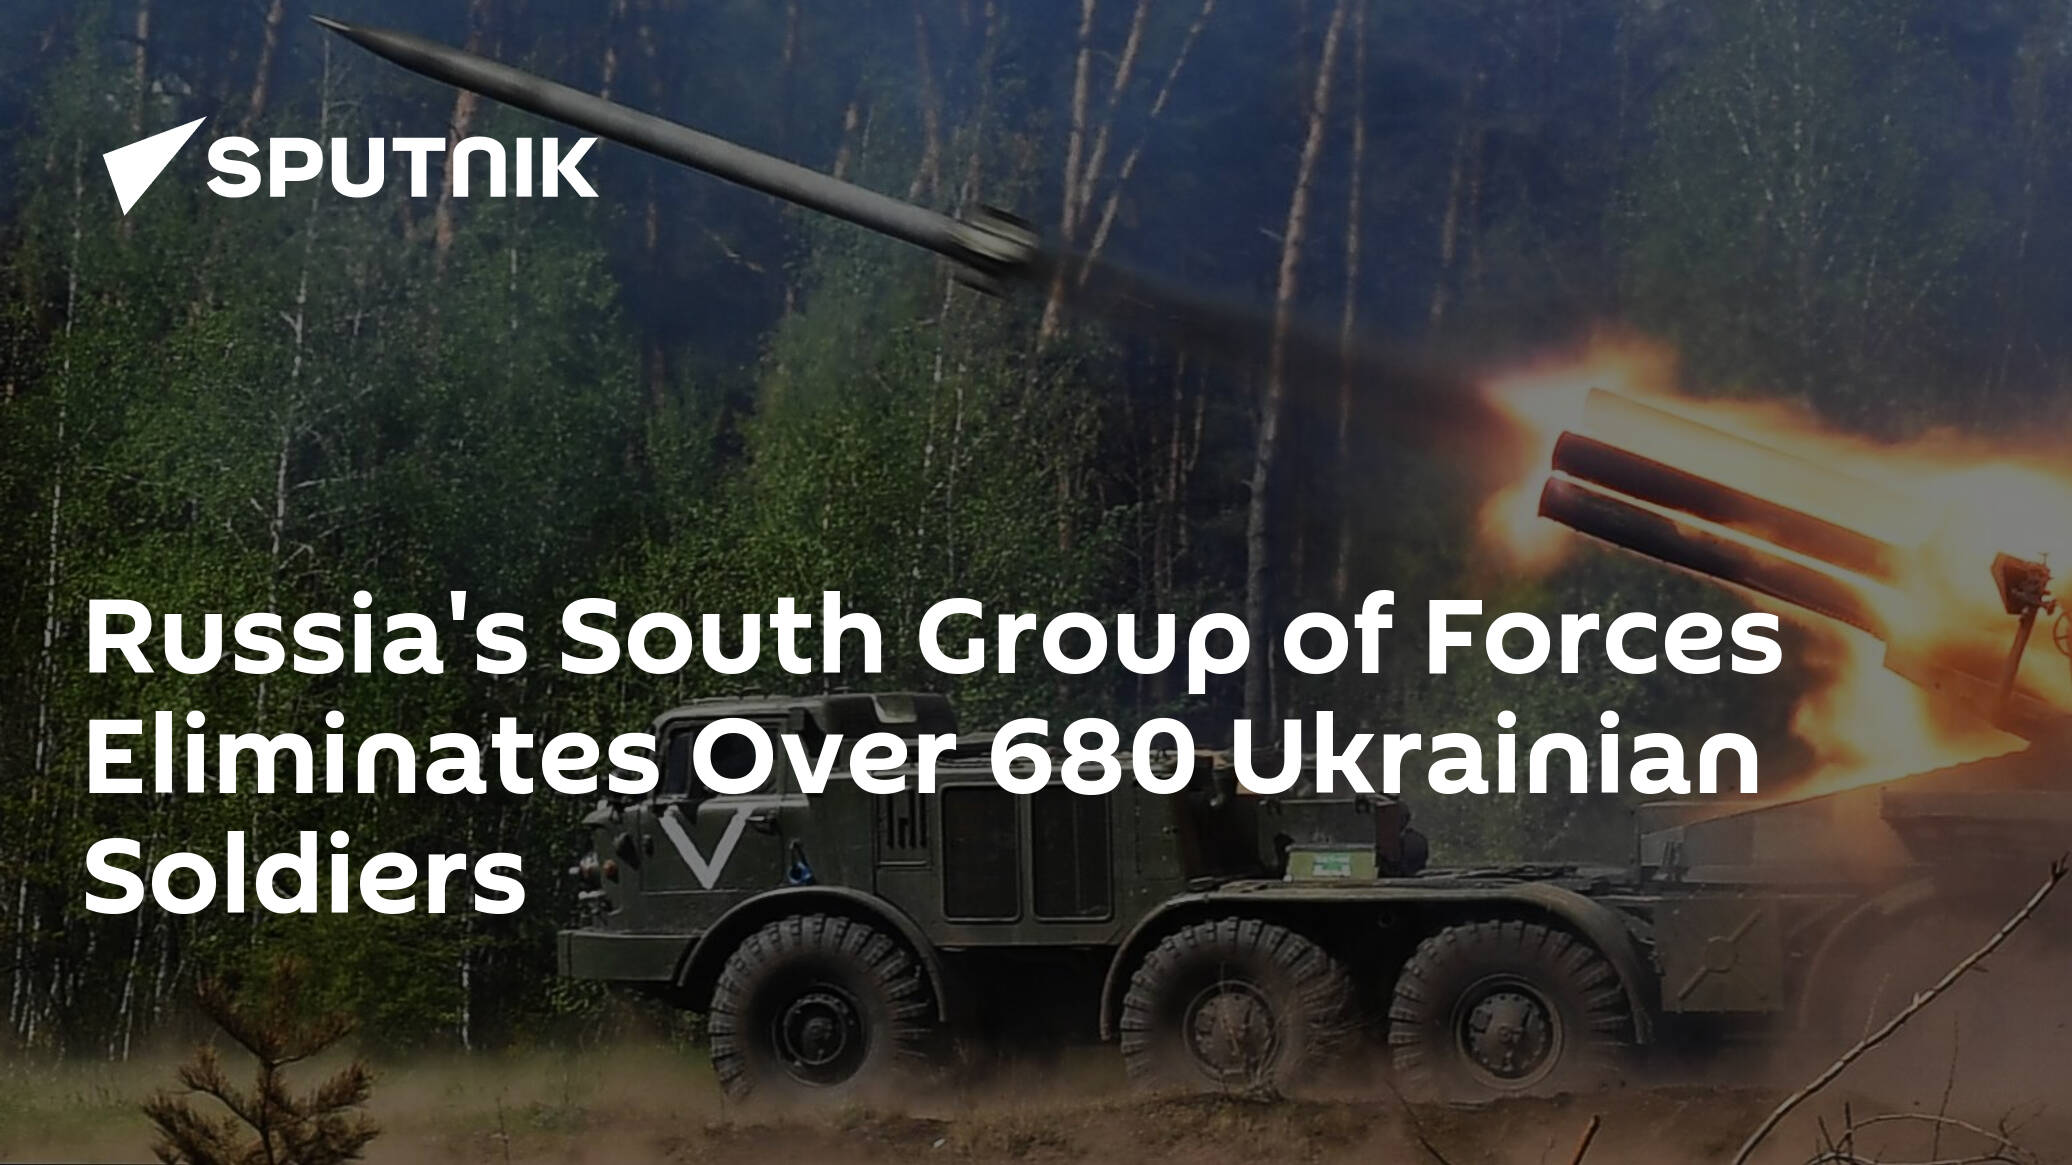 Russia's South Group of Forces Eliminates Over 680 Ukrainian Soldiers